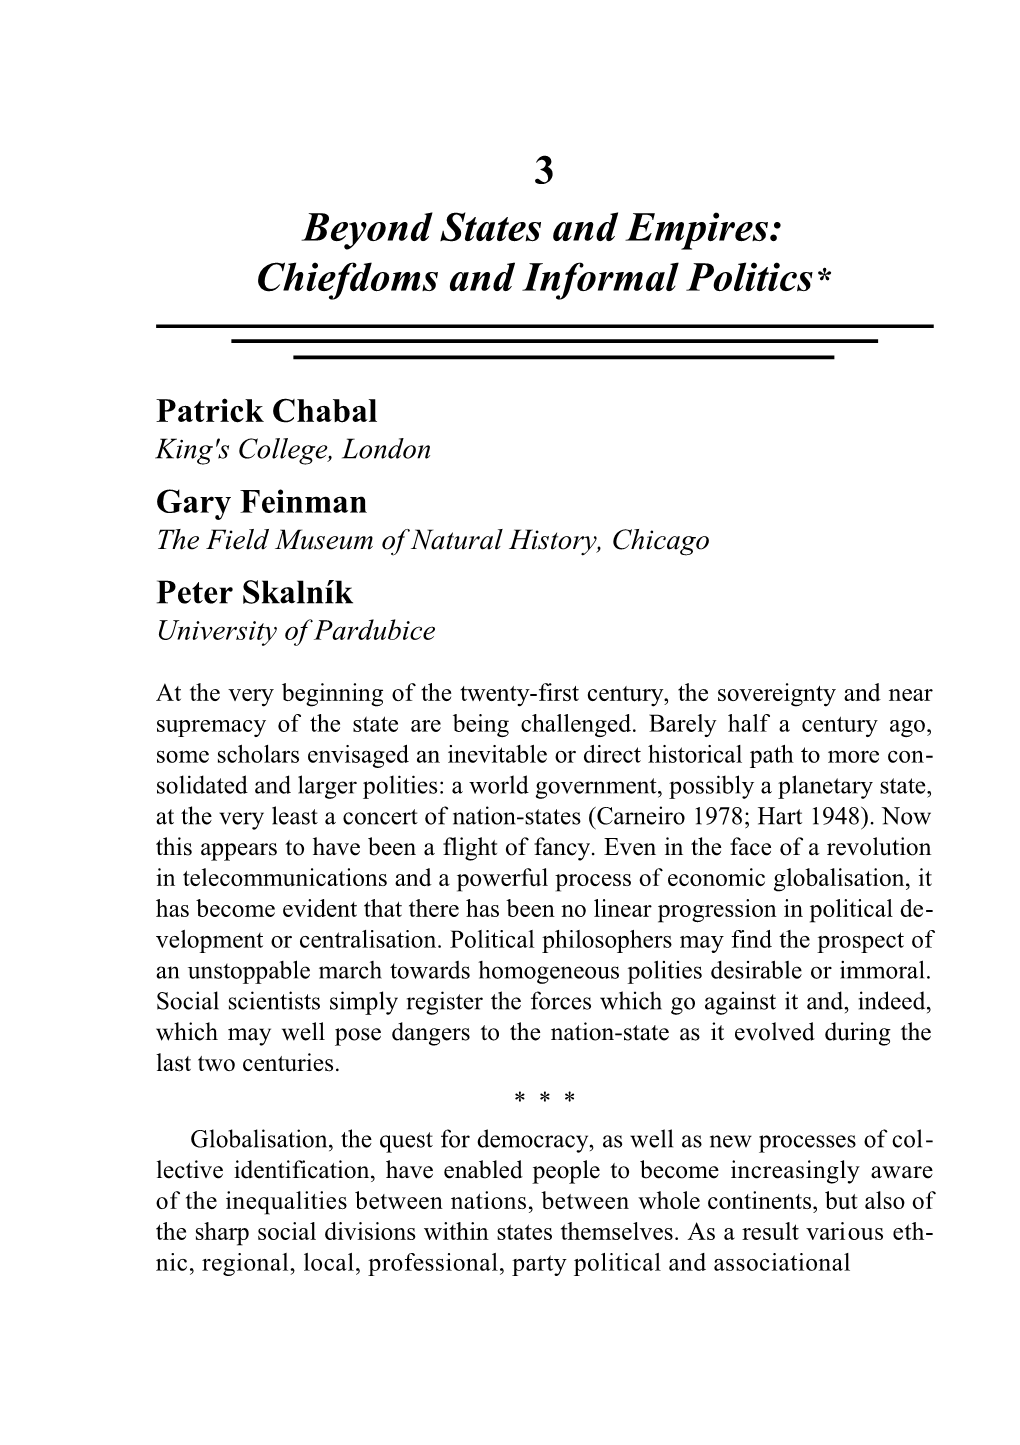 Chabal, Feinman, and Skalník / Beyondstates and Empires 1